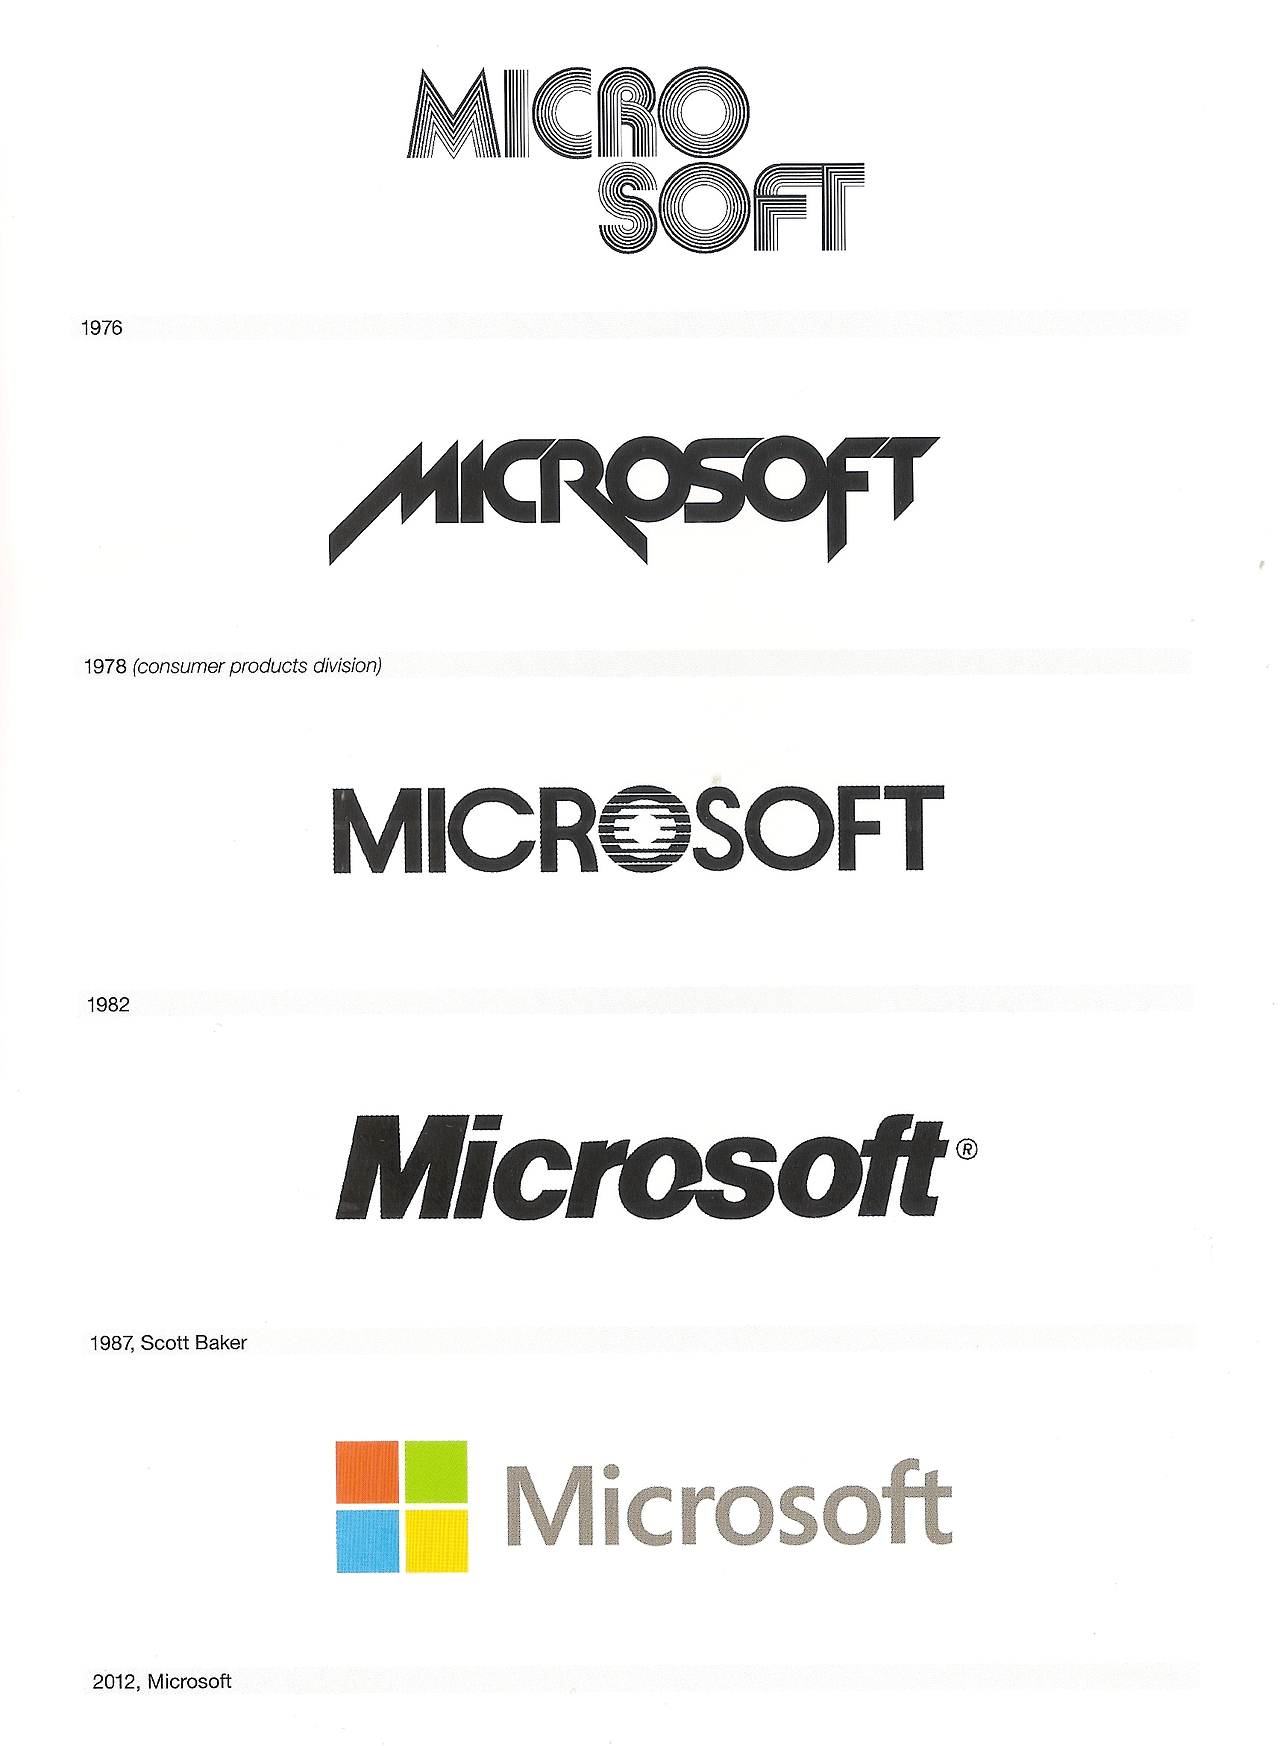 Simulator Logo - The Microsoft logo throughout the years. My brother had Microsoft ...